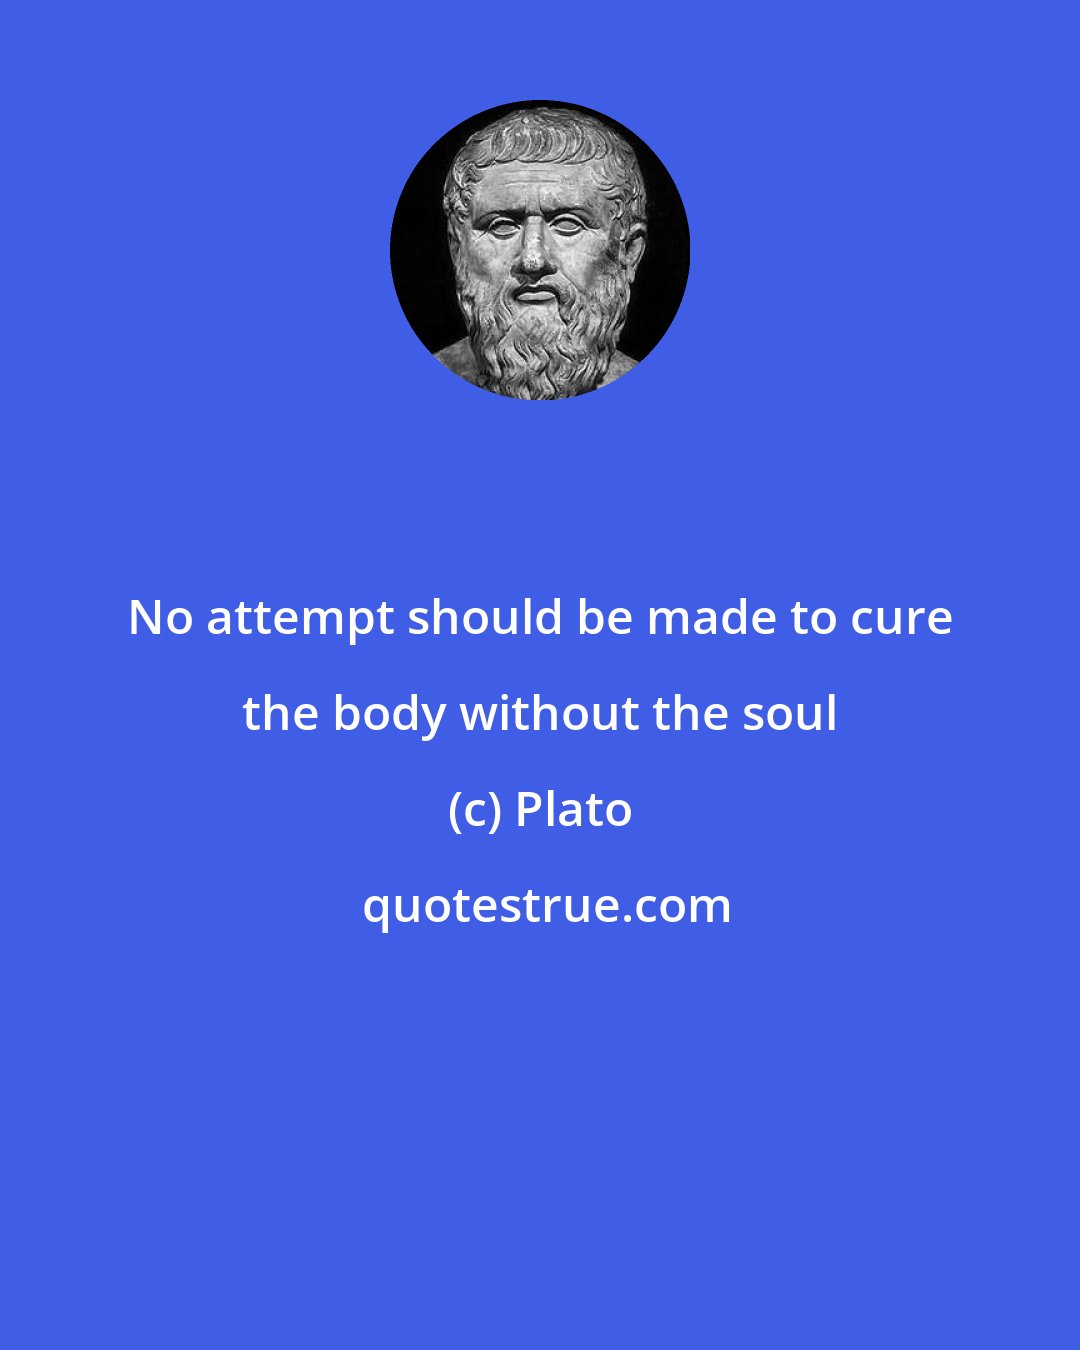 Plato: No attempt should be made to cure the body without the soul